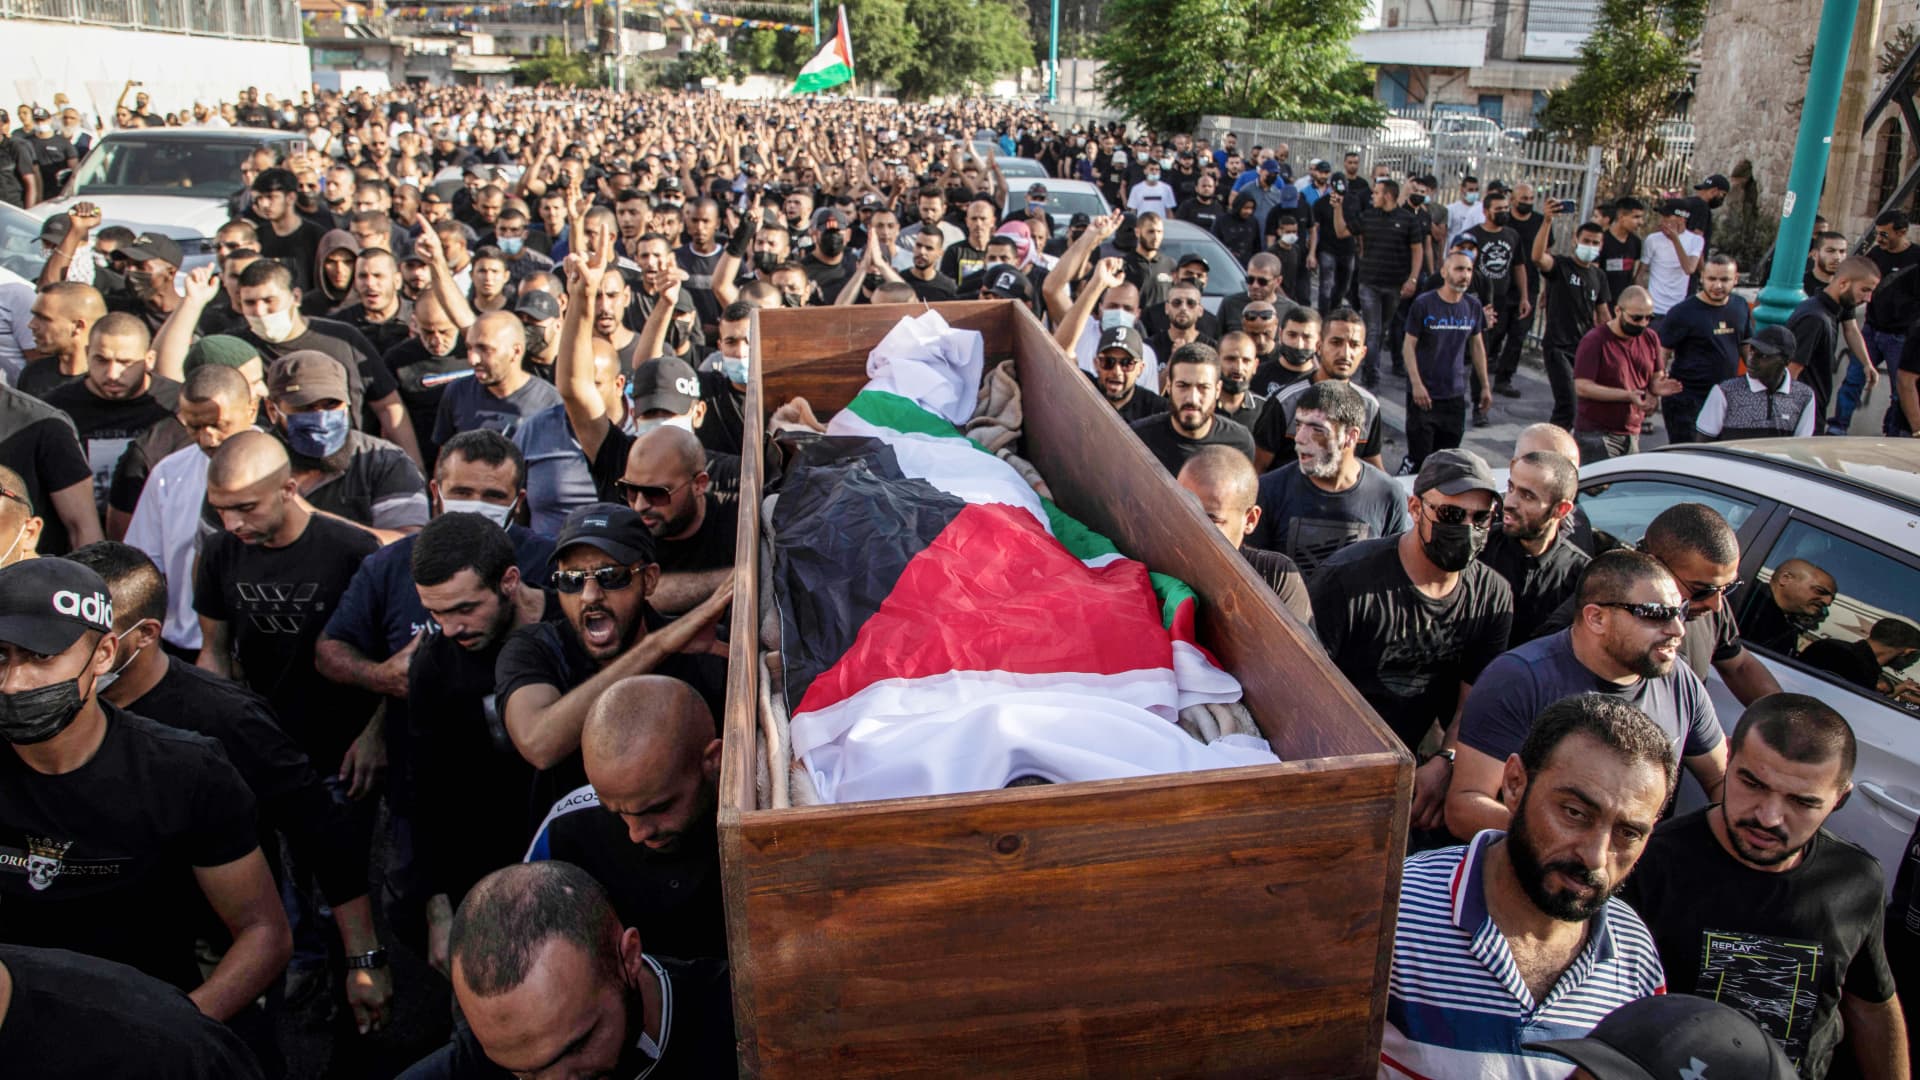 Israeli Arabs carry the coffin of a 25-year-old Israeli-Arab man, who was shot and killed during riots the previous night, during his funeral in the city of Lod.